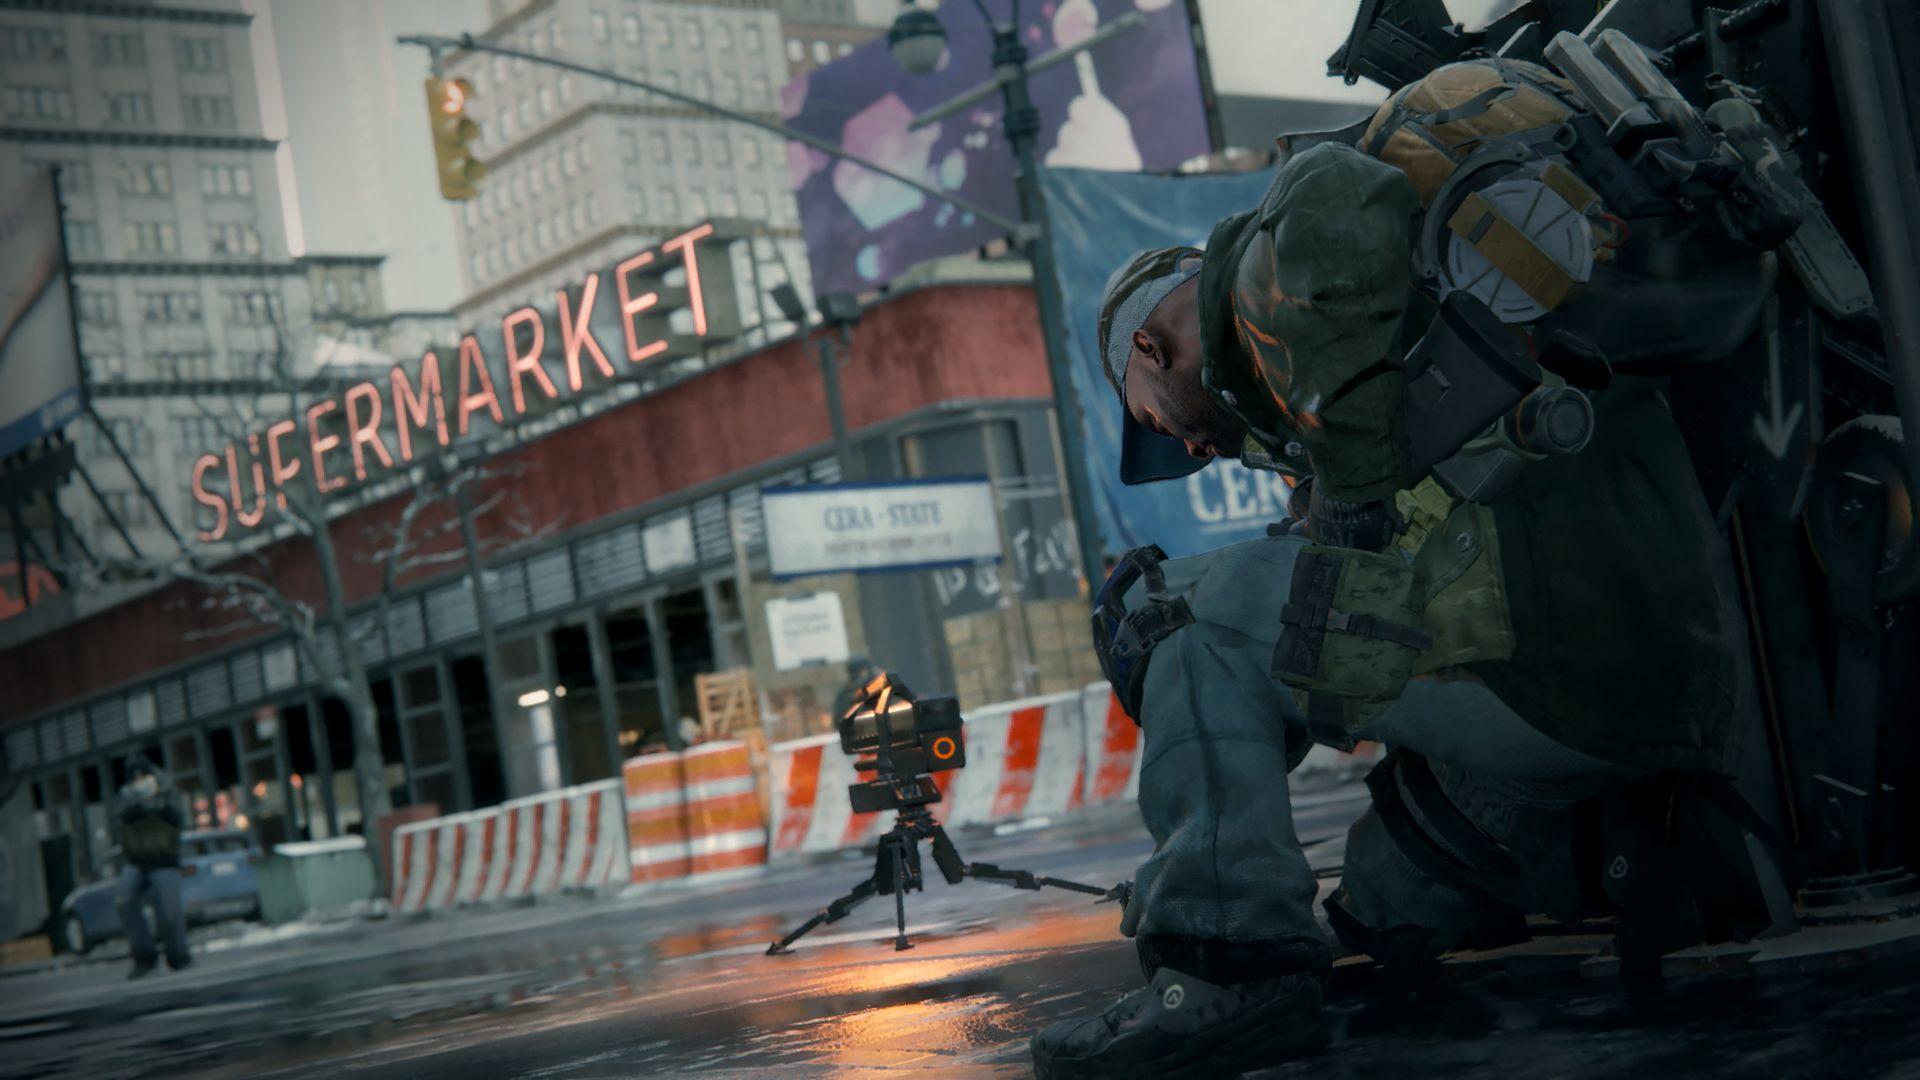 The Division Wallpaper, Picture, Image